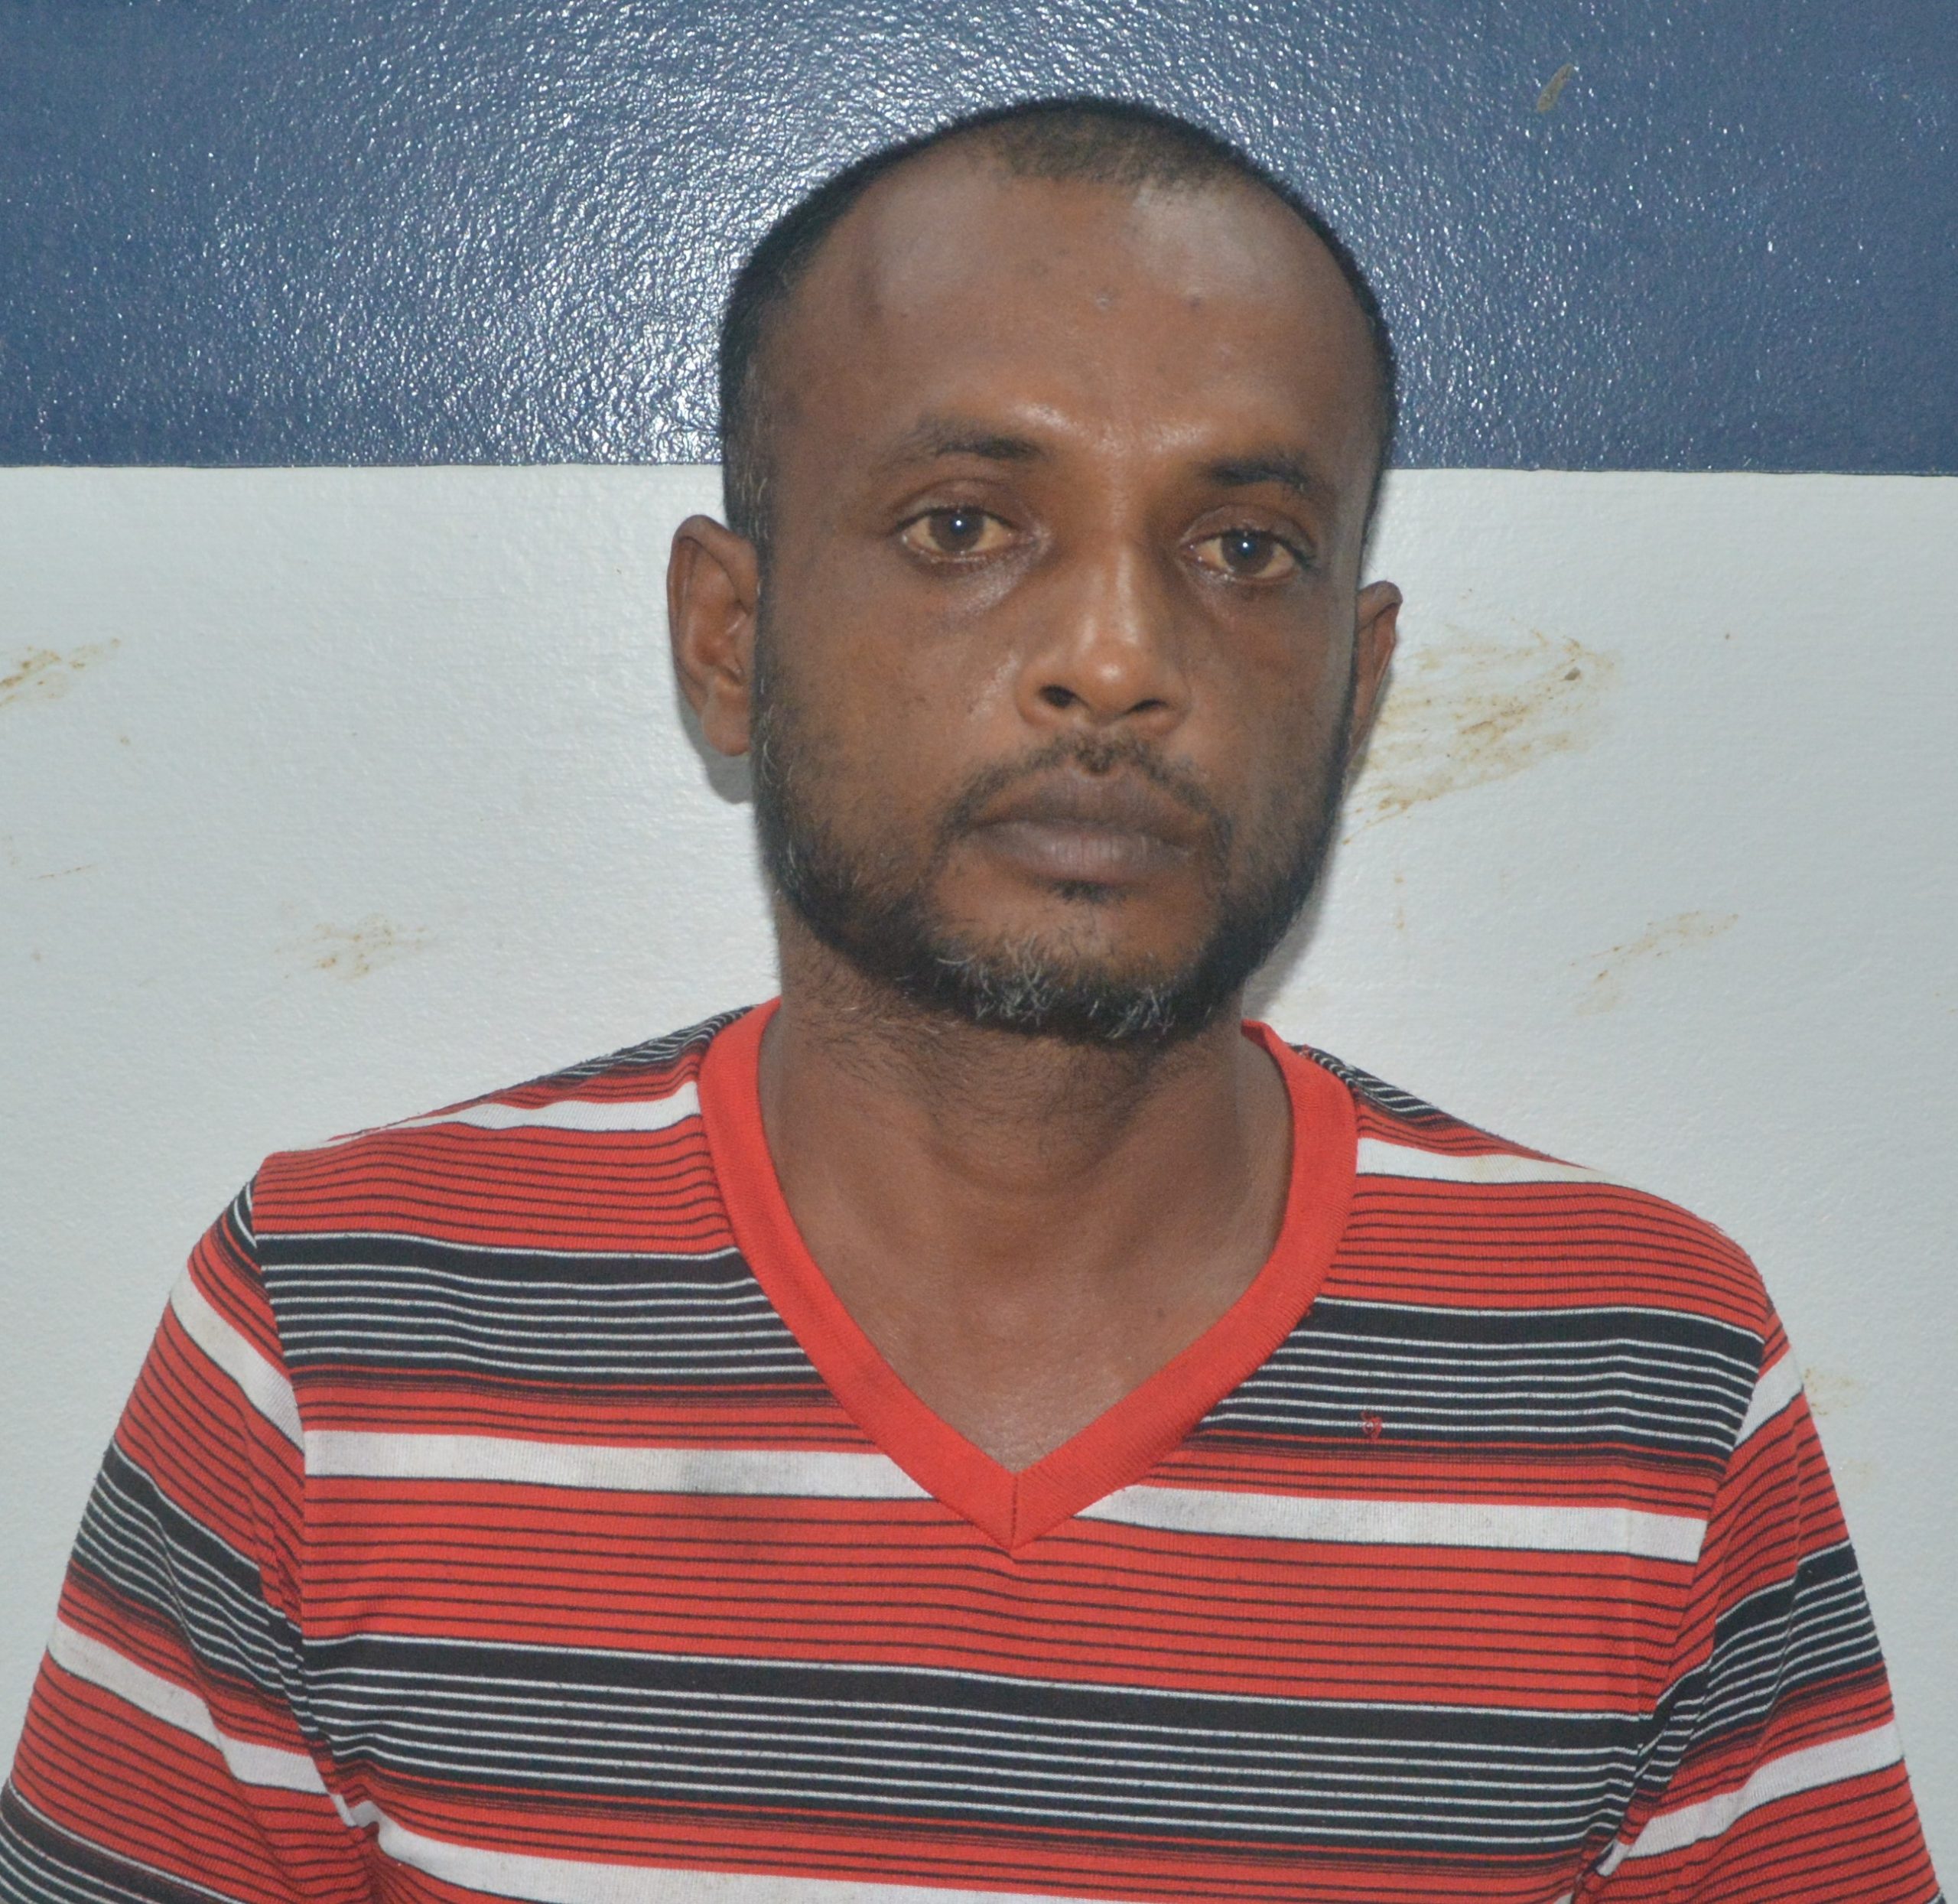 No Bail For Guyanese Labourer Charged With Two Counts of Common Assault.